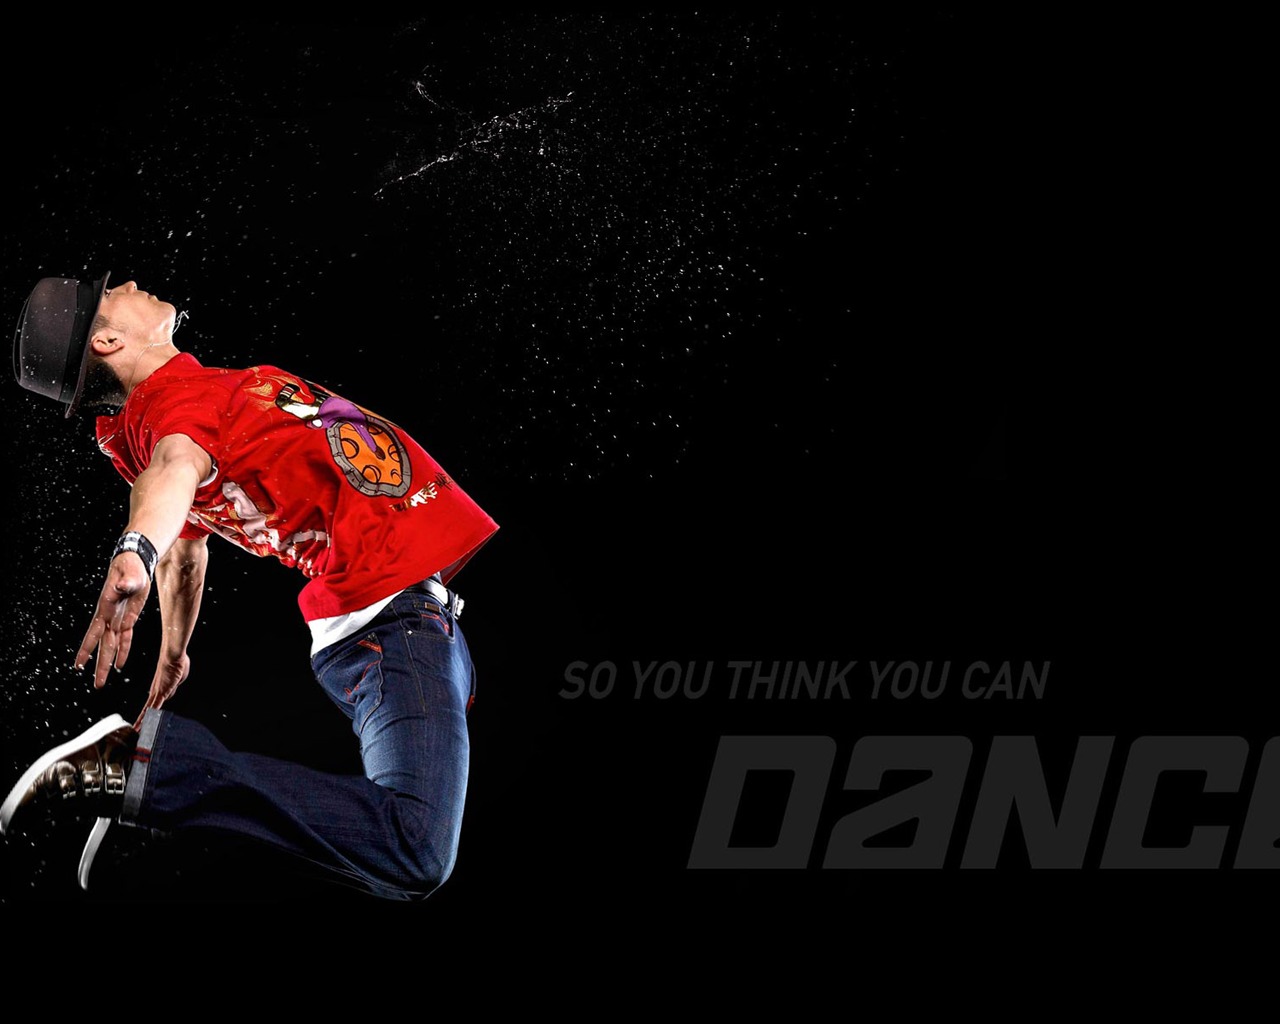 So You Think You Can Dance 舞林爭霸壁紙(一) #6 - 1280x1024